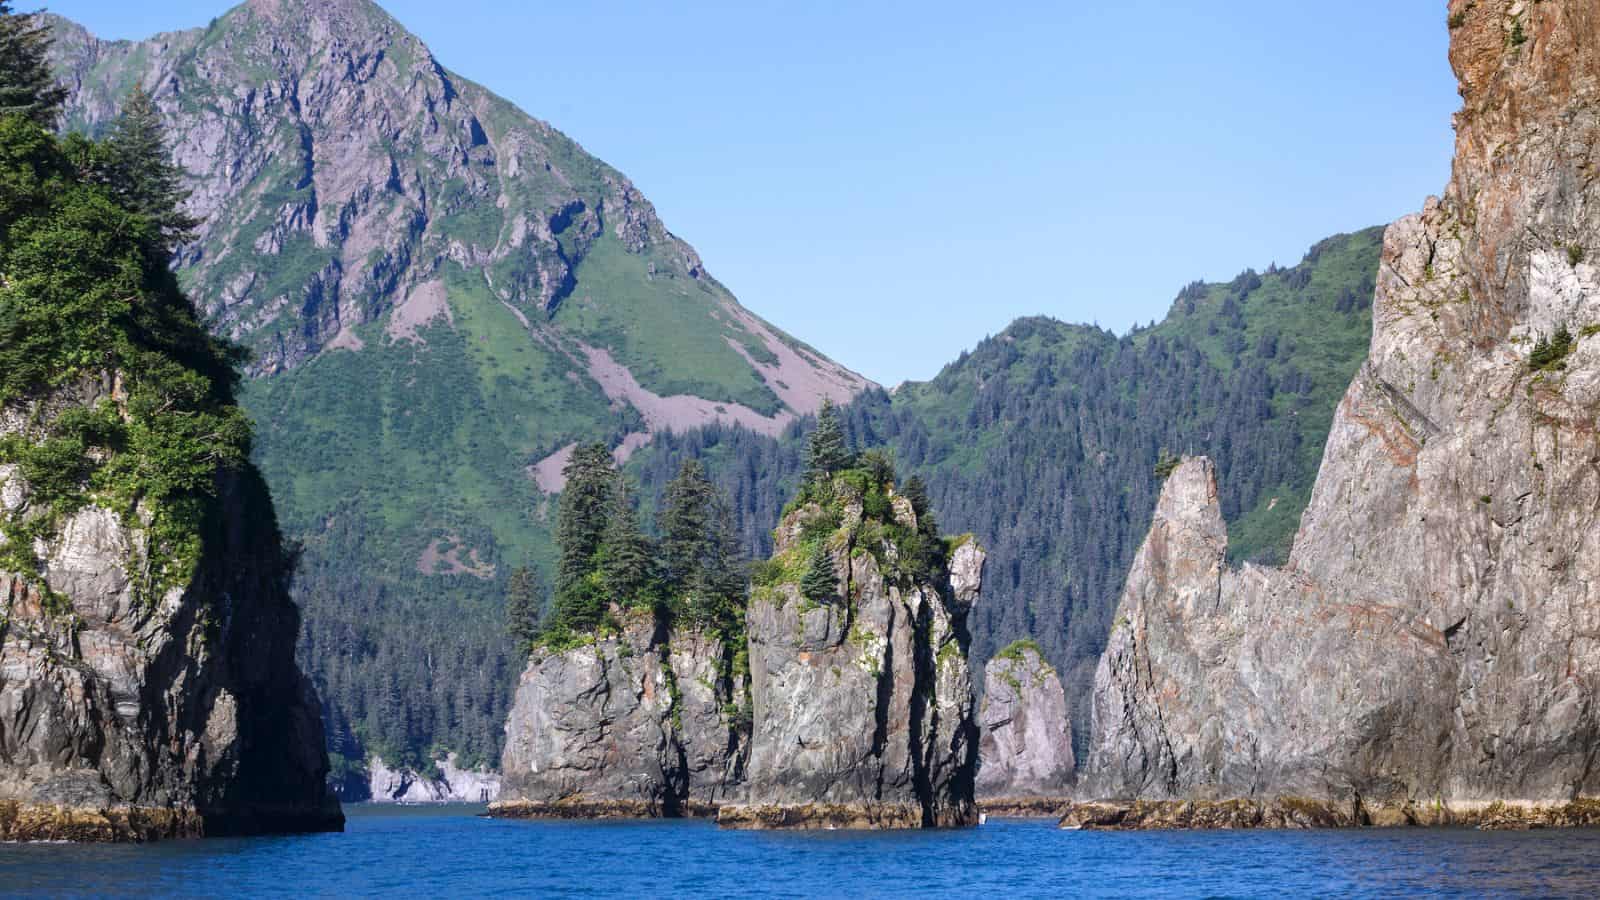 <p>If you’re looking for a kayaking experience that’s both unique and exhilarating, Kenai Fjords National Park in Alaska is a must-visit destination. With its dramatic mountains and crystal-clear waters, this park offers a once-in-a-lifetime experience for kayakers of all skill levels.</p> <p>As you paddle through the park’s icy waters, you’ll have the opportunity to see a wide variety of marine life, including whales, otters, and sea lions. You might even catch a glimpse of a puffin or two!</p> <p>For those who enjoy hiking, the park also offers plenty of opportunities for exploring on foot. With miles of trails winding through the mountains and along the coast, there’s always something new to discover. And if you’re feeling adventurous, you can even try your hand at whitewater kayaking in some of the park’s more challenging rapids.</p>